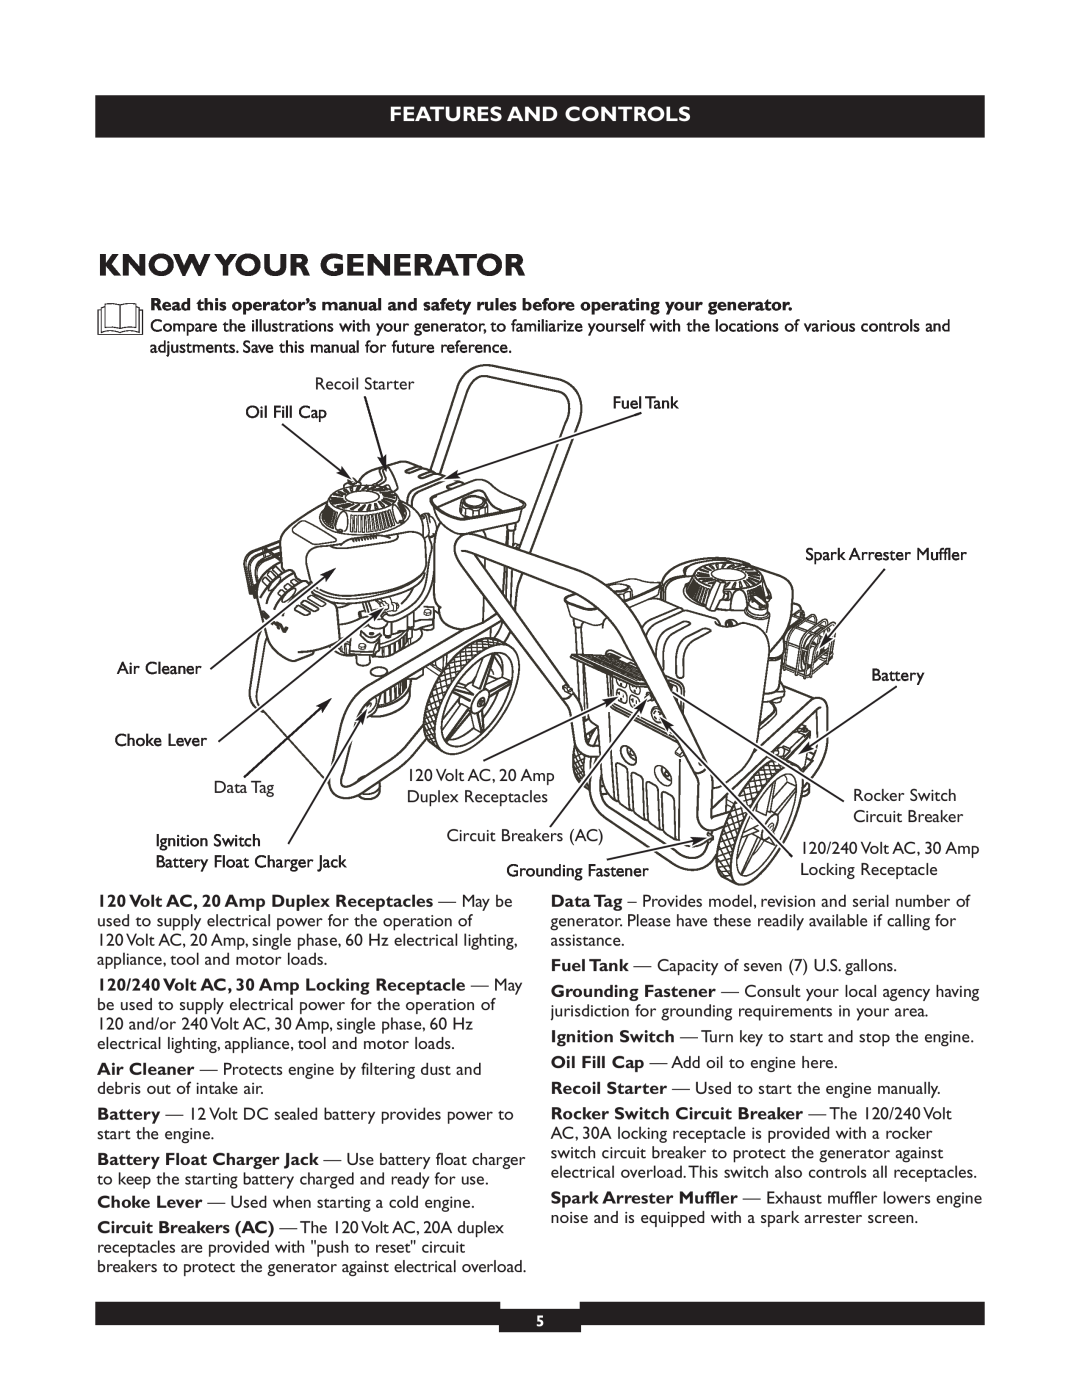 Briggs & Stratton 30205 manual Know Your Generator, Features And Controls, Volt AC, 20 Amp Duplex Receptacles - May be 